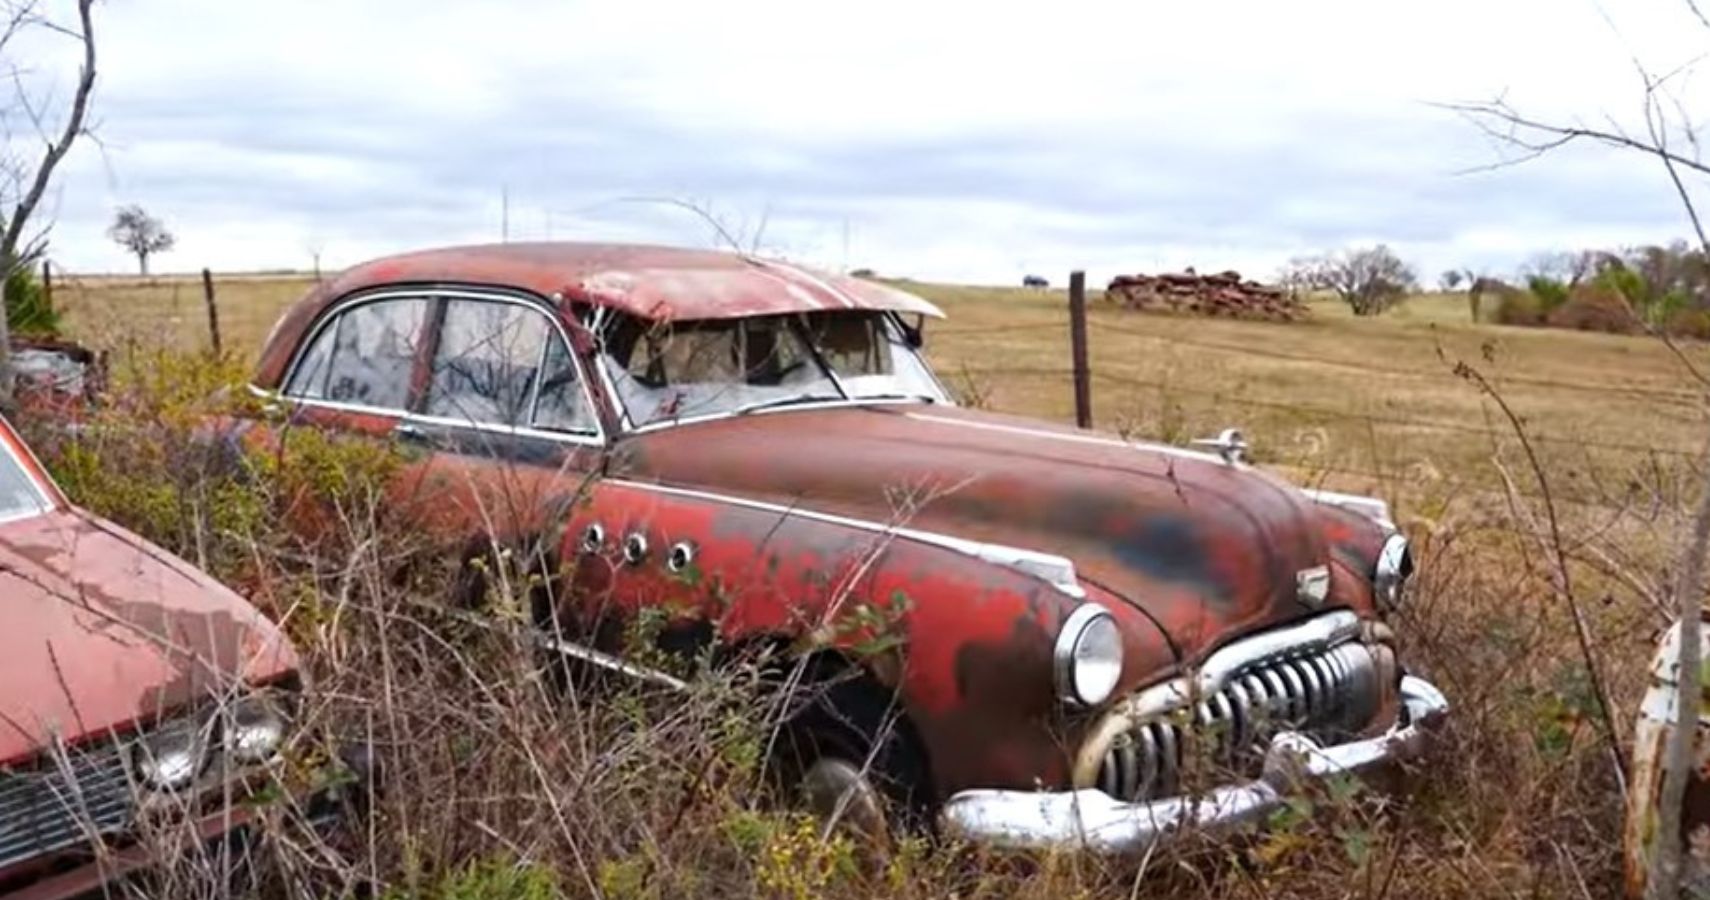 A Millionaire’s Abandoned Classic Car Collection Offers Some Hidden Gems